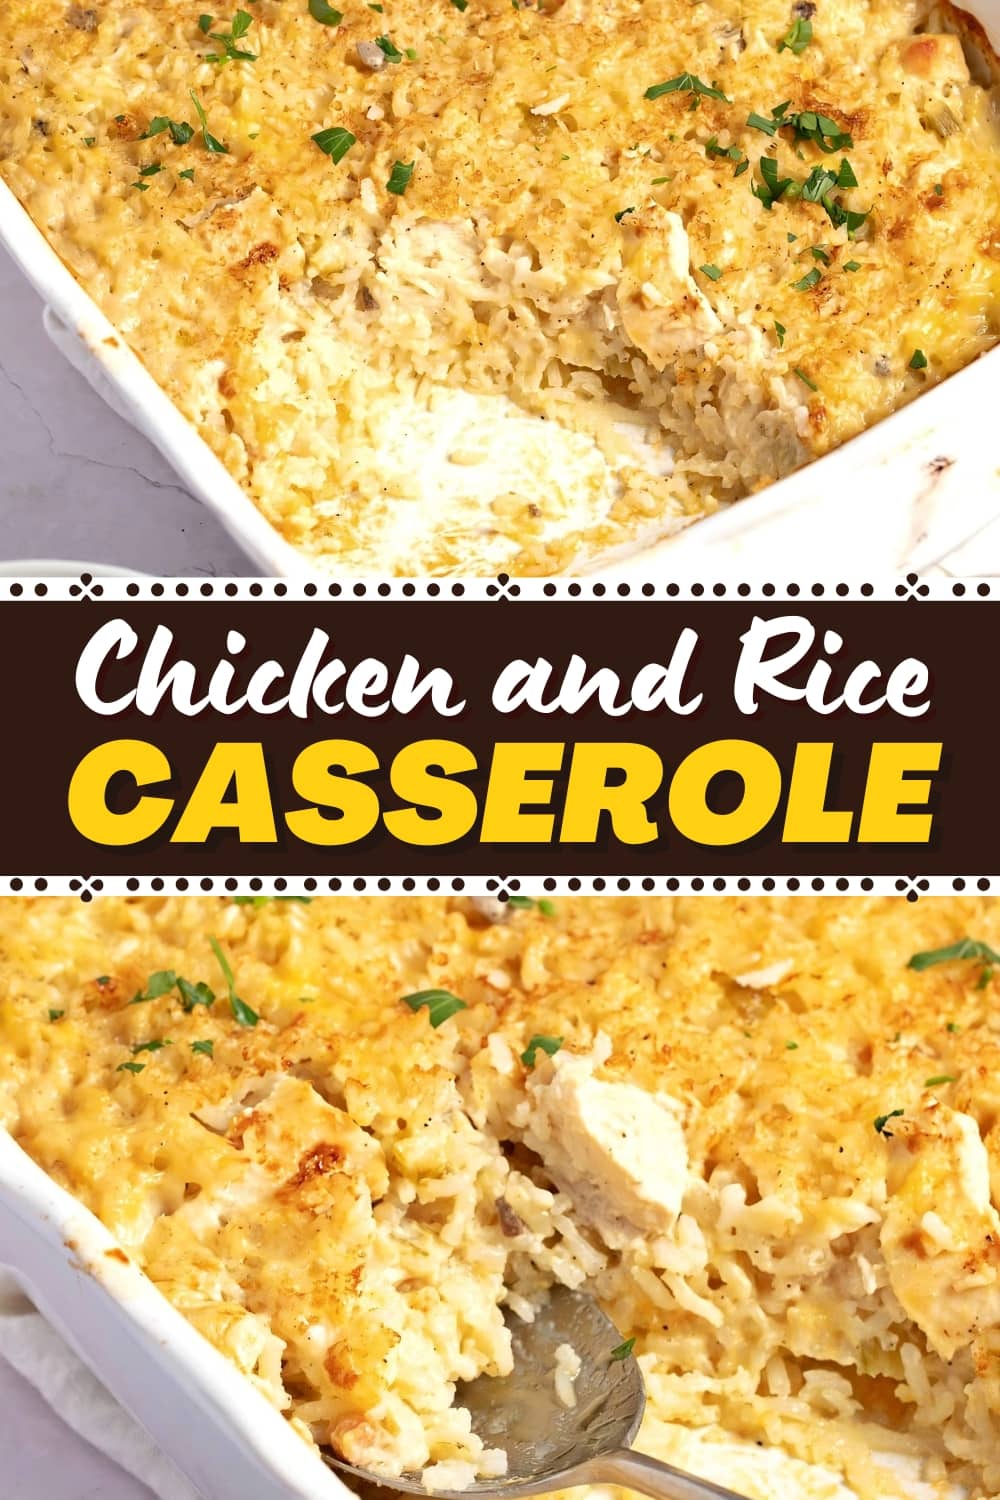 Chicken and Rice Casserole Recipe - Insanely Good